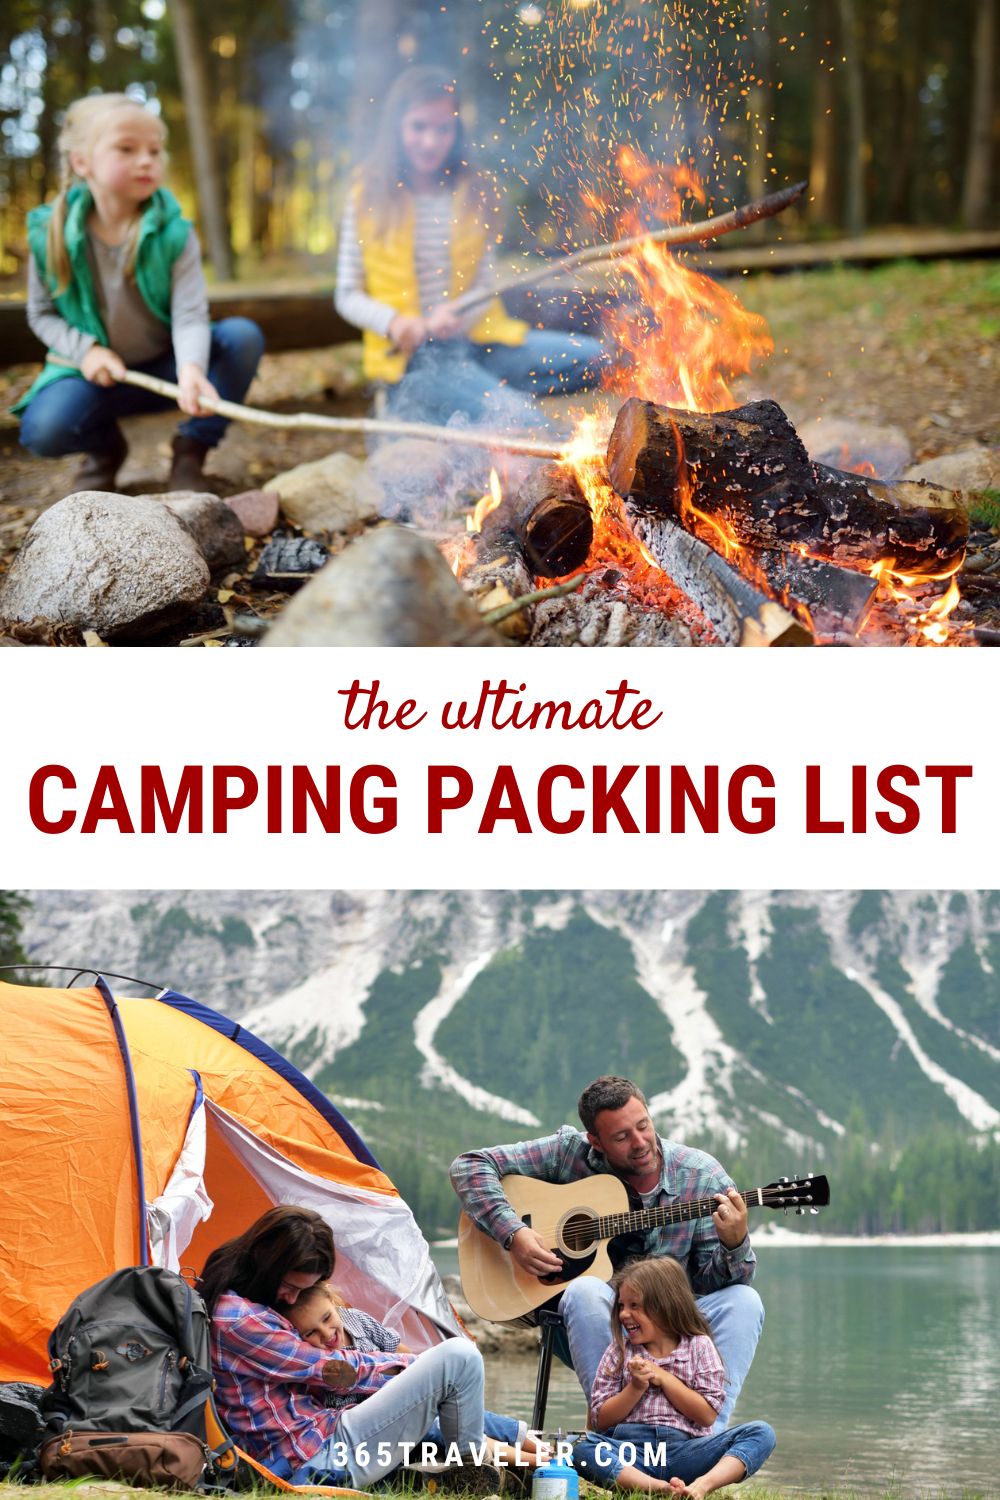 The Ultimate Camping Packing List: 84 Things You Need (+ Our Advice on the Best Brands)